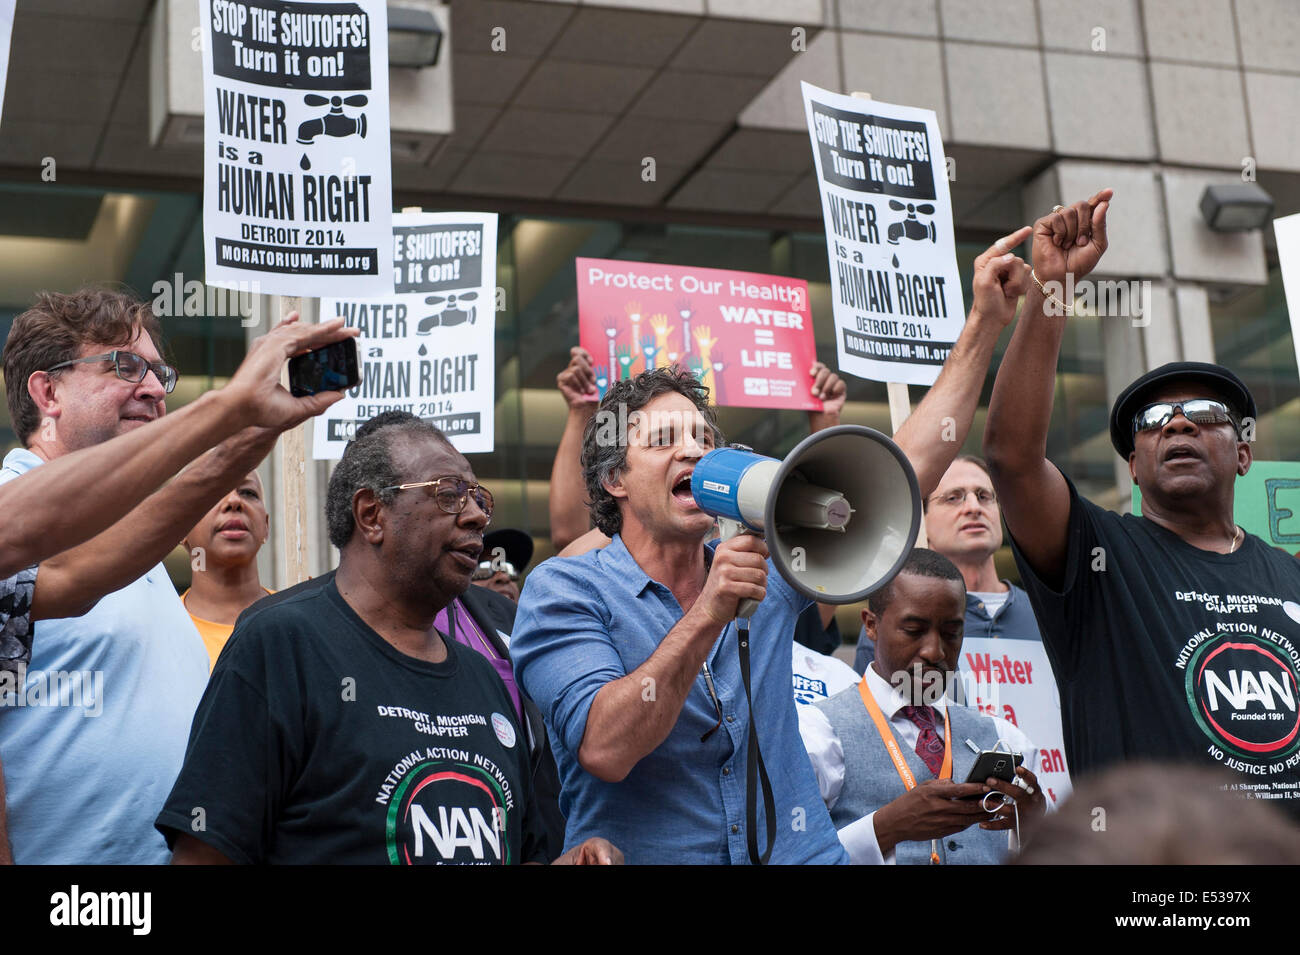 Chicago, USA. 18th July, 2014. Actor and activist Mark Ruffalo joins demonstrators outside Cobo Center in Detroit, the United States, as they prepare to take to the streets in protest of residential water shut offs in the city by the Detroit Water and Sewerage Department(DWSD) on July 18, 2014. DWSD said in March it would target Detroit homes with overdue bills of $150, or more than two months late. Since spring it has shut off water to more than 15,000 homes. © James Fassinger/Xinhua/Alamy Live News Stock Photo